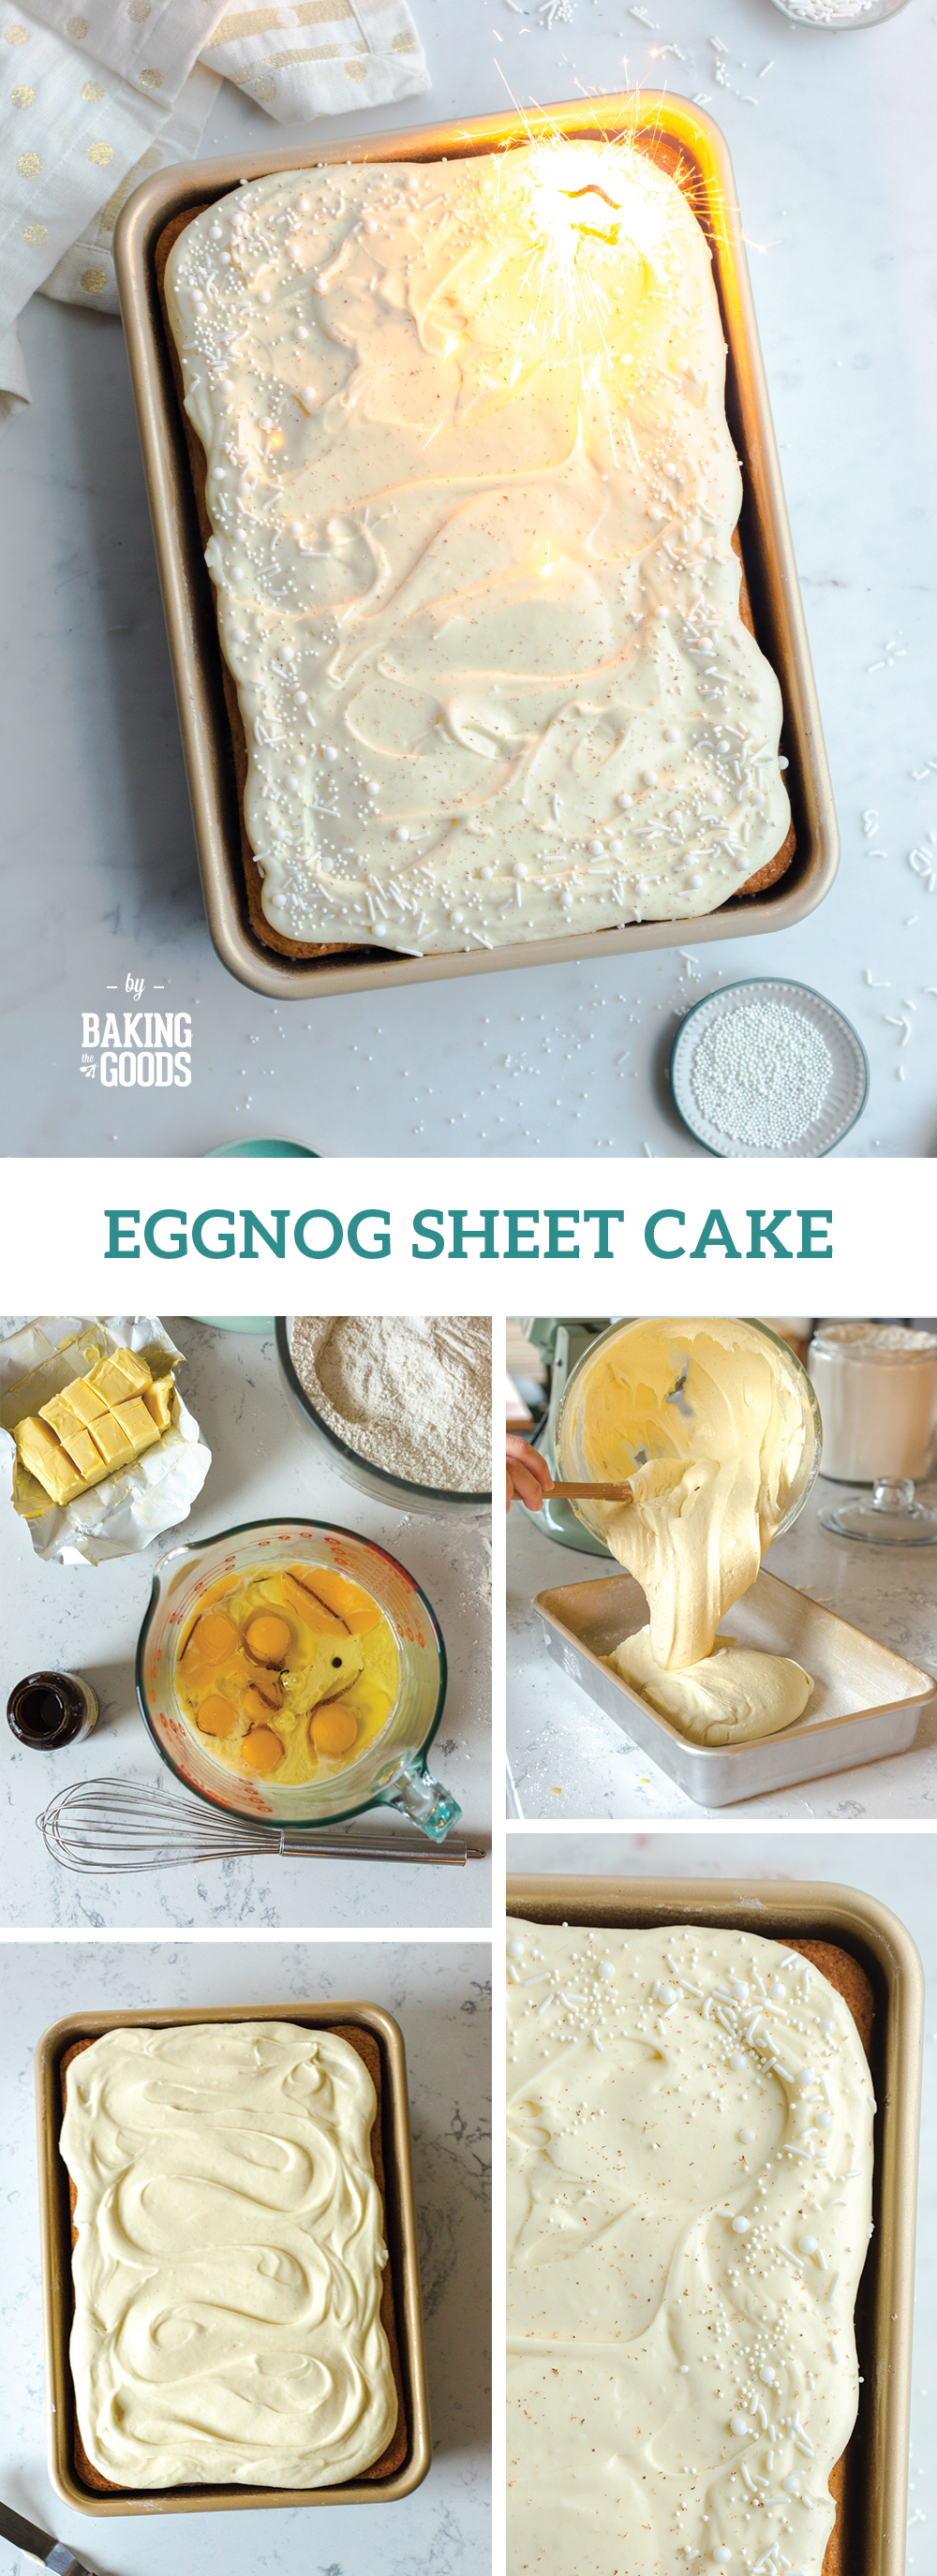 Eggnog Sheet Cake by Baking The Goods